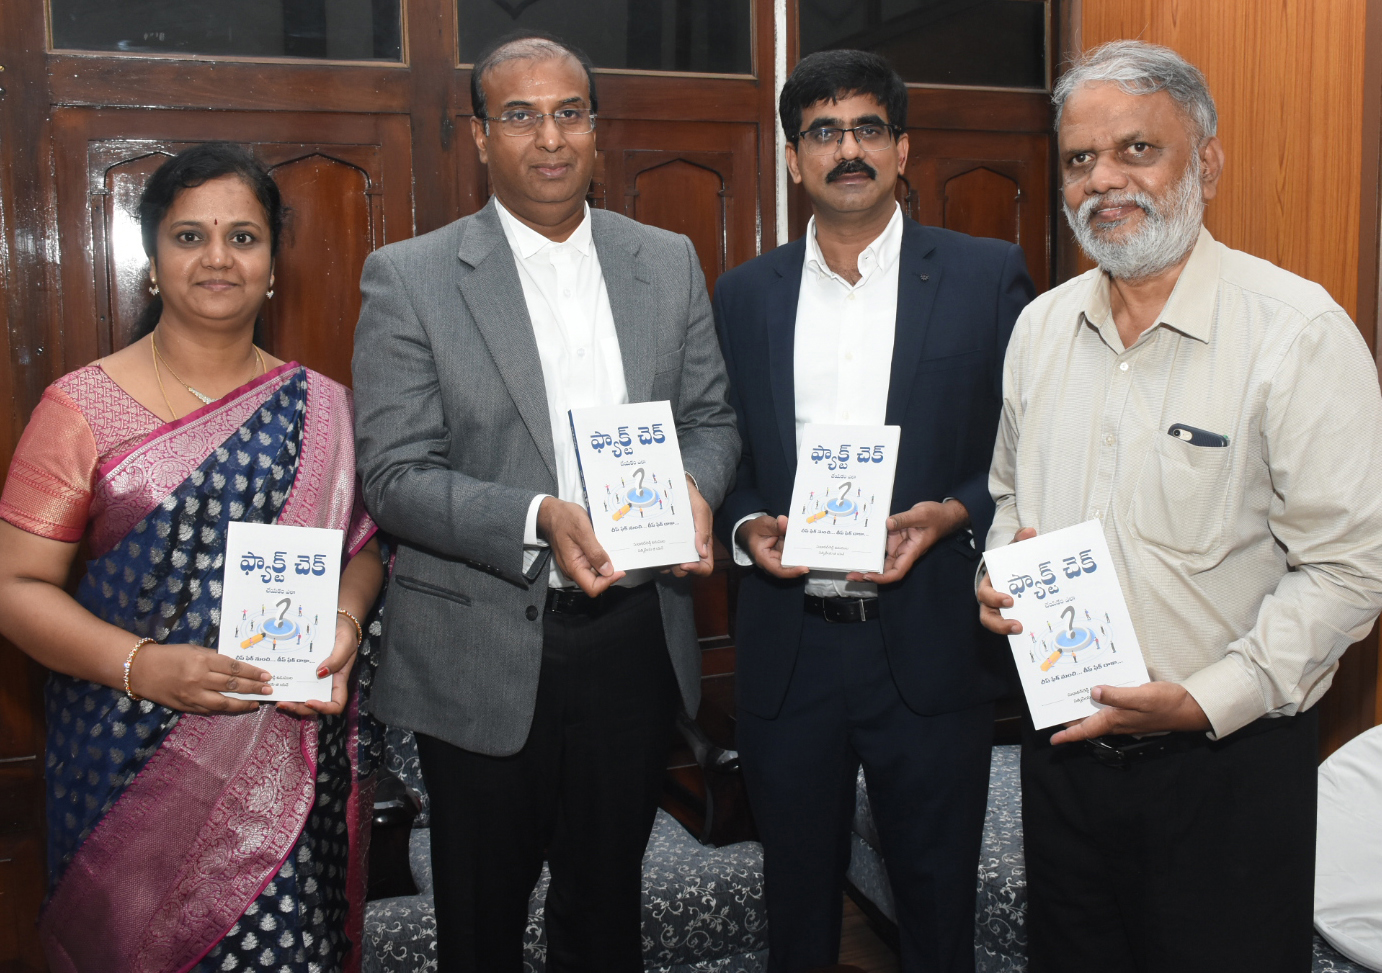 Telangana High Court Judge, Justice B Vijaysen Reddy (2nd from Left), releasing the Telugu book 'Fact Check cheyadam ela' at the High Court premises, today. The book is authored by Senior Journalist Sudhakar Reddy Udumula (3rd from Left) and Fact checker BN Satya Priya (Extreme Left), also seen is Prof. K. Stevenson (Extreme Right), Dean, Osmania University.